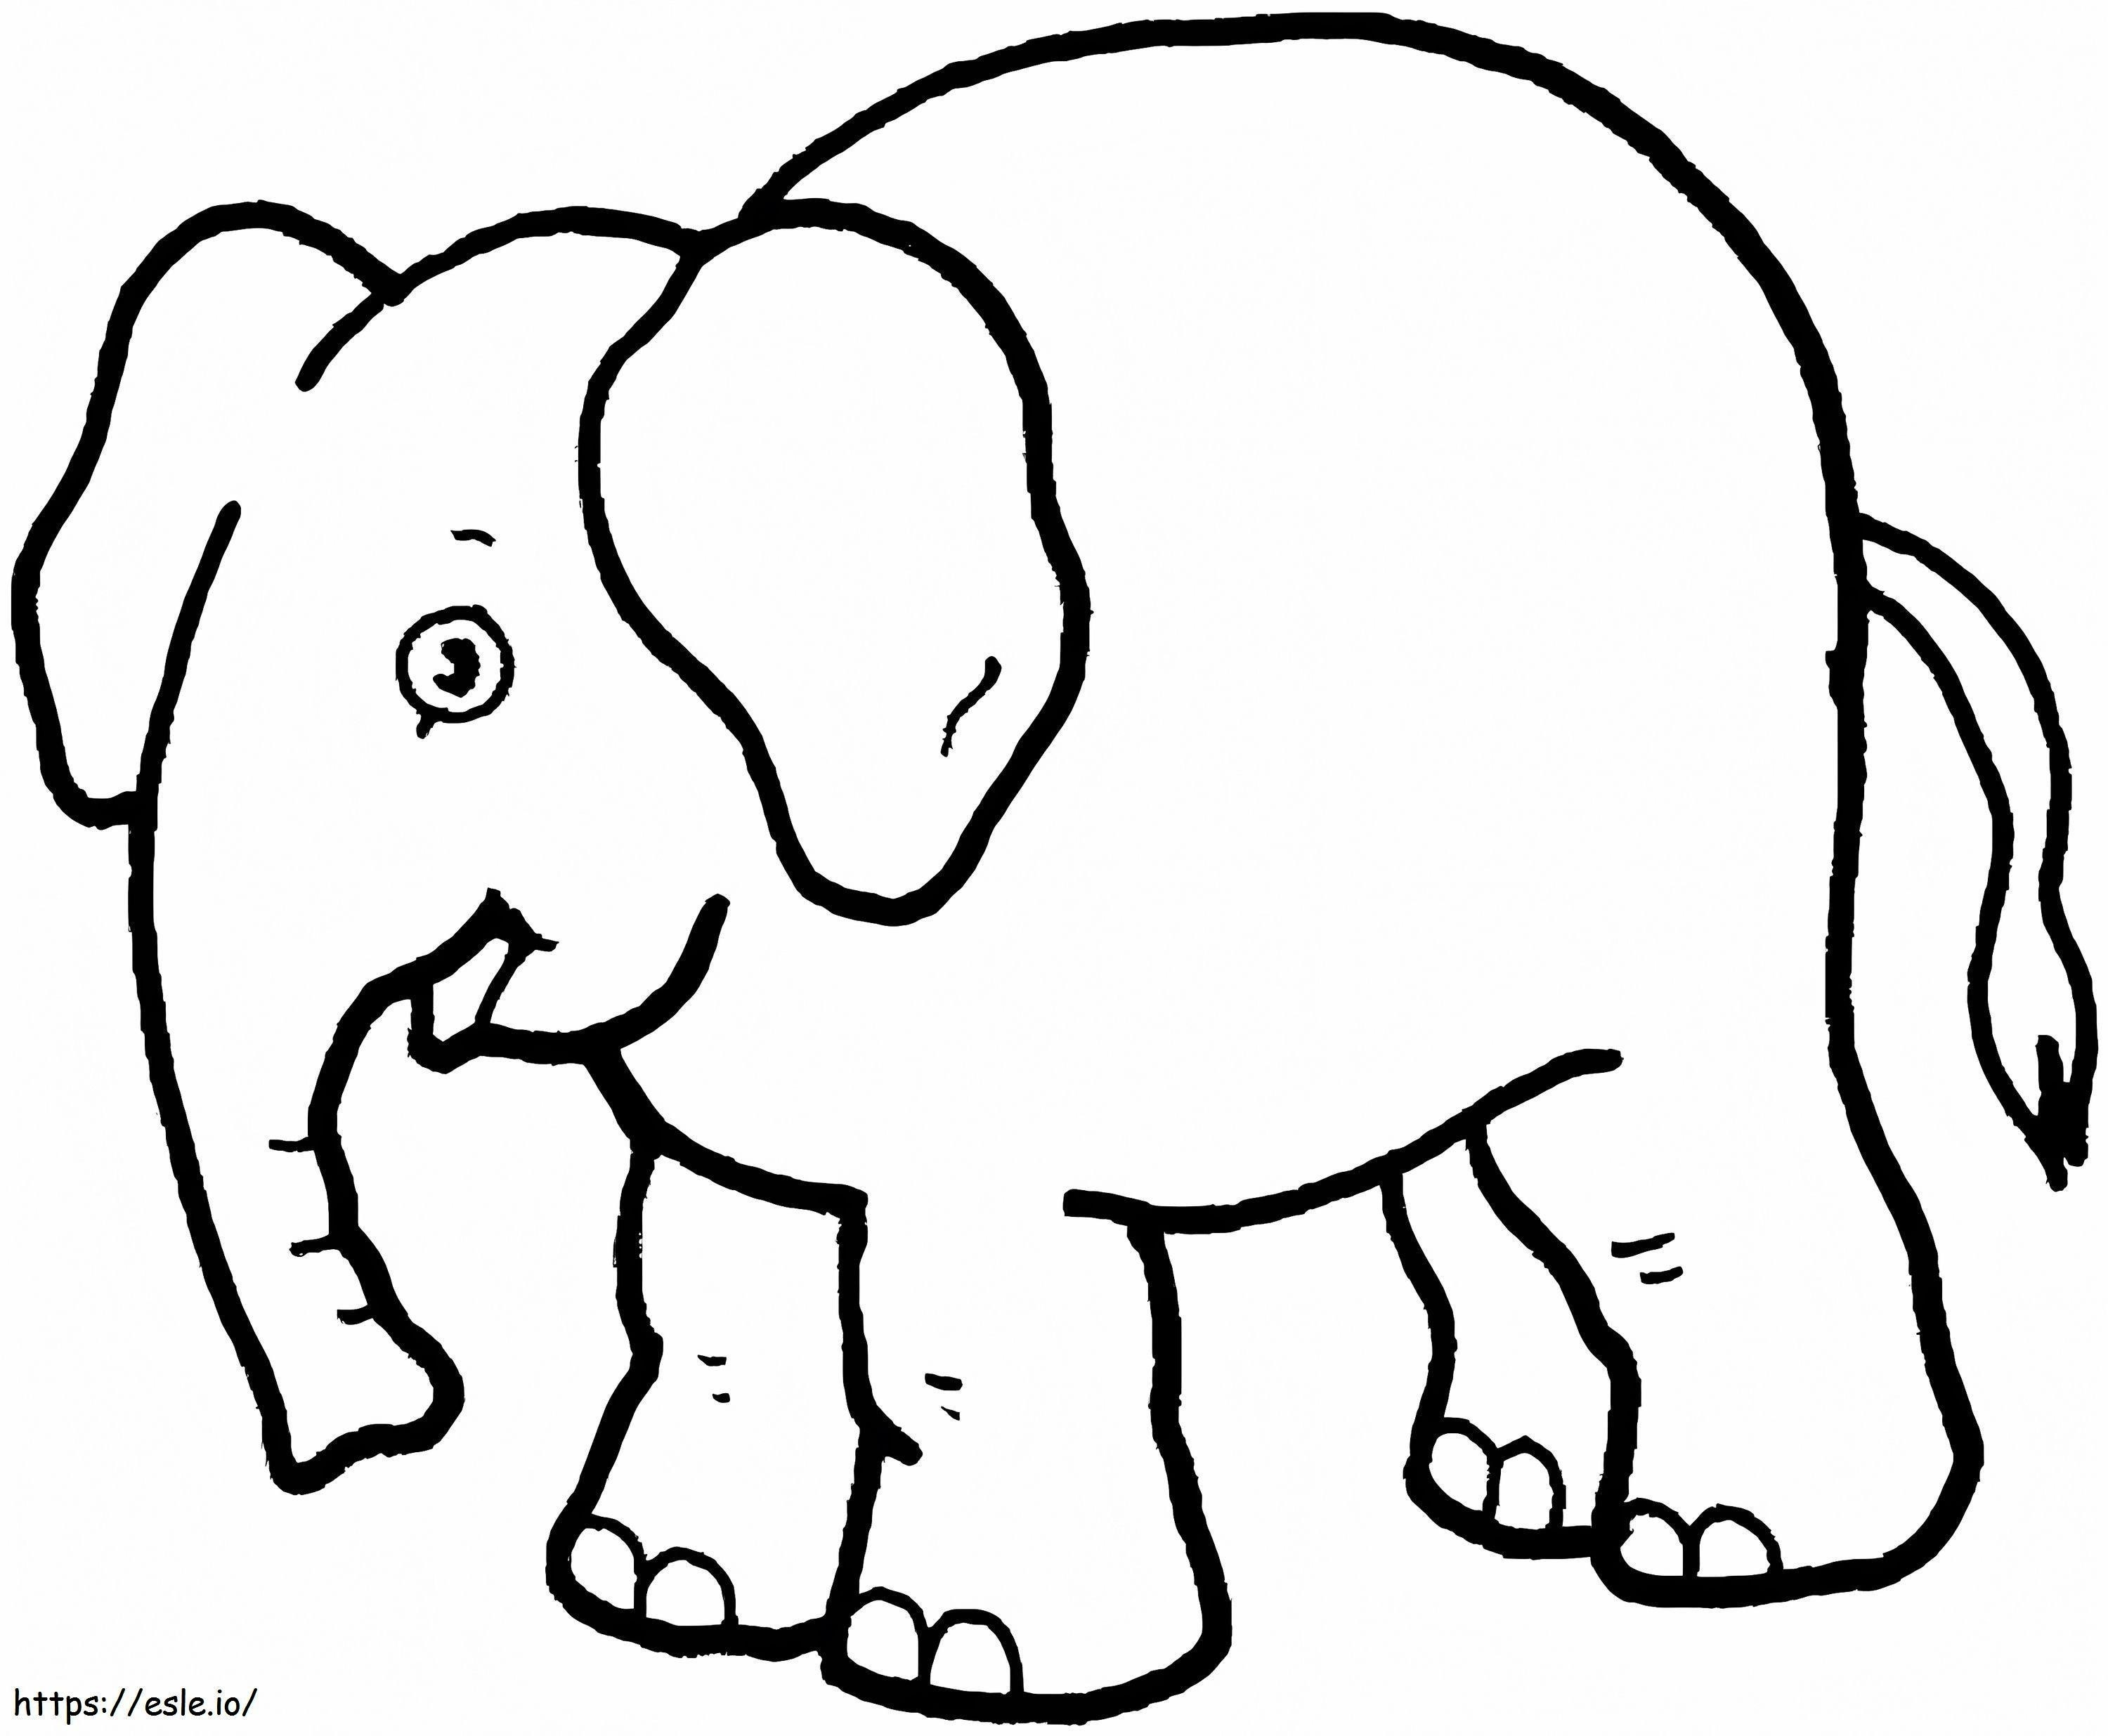 A Funny Elephant coloring page